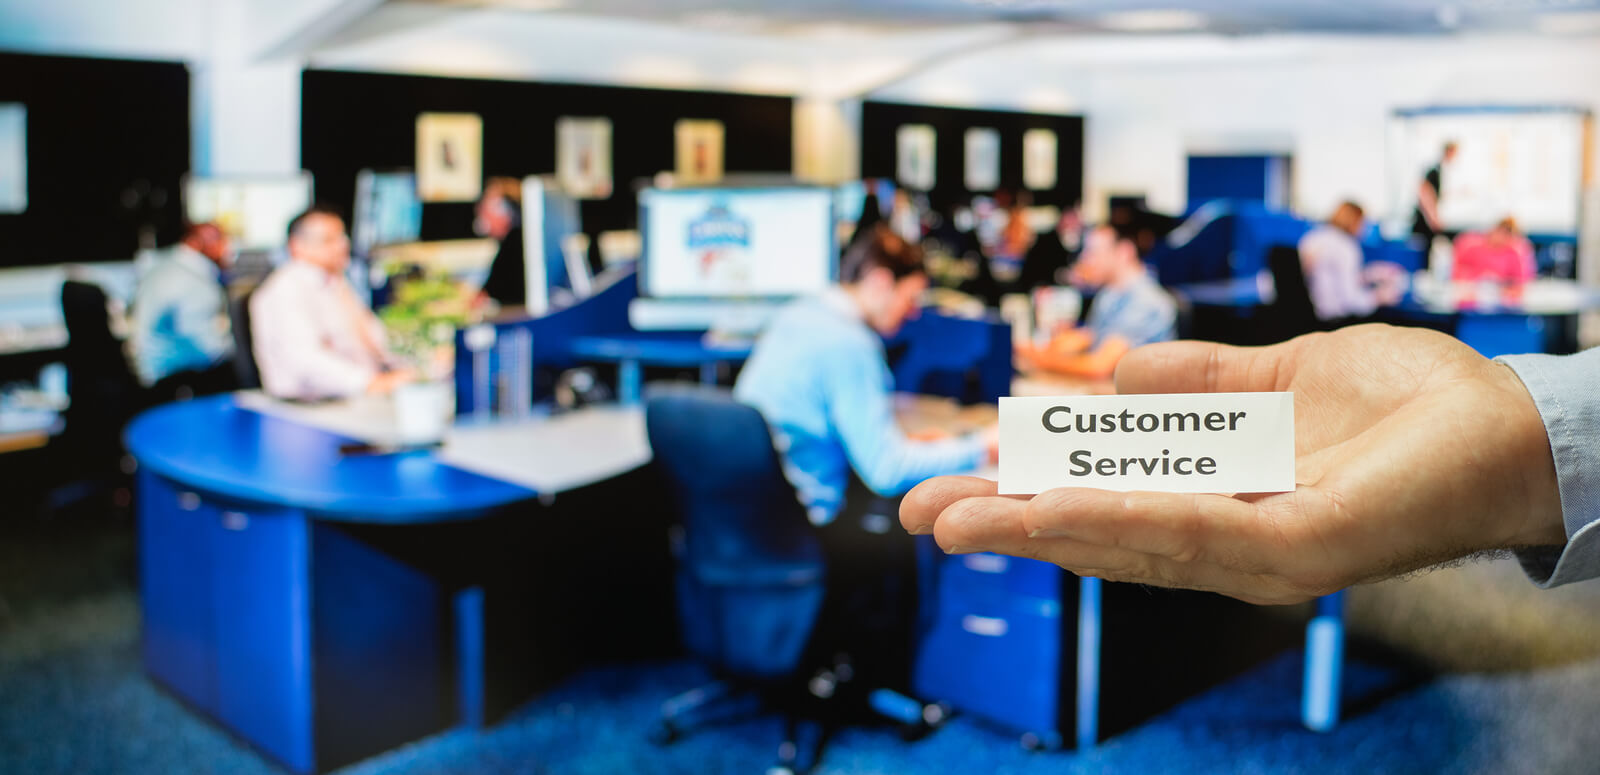 4 Top Ways to Maintain Consistency in Customer Service